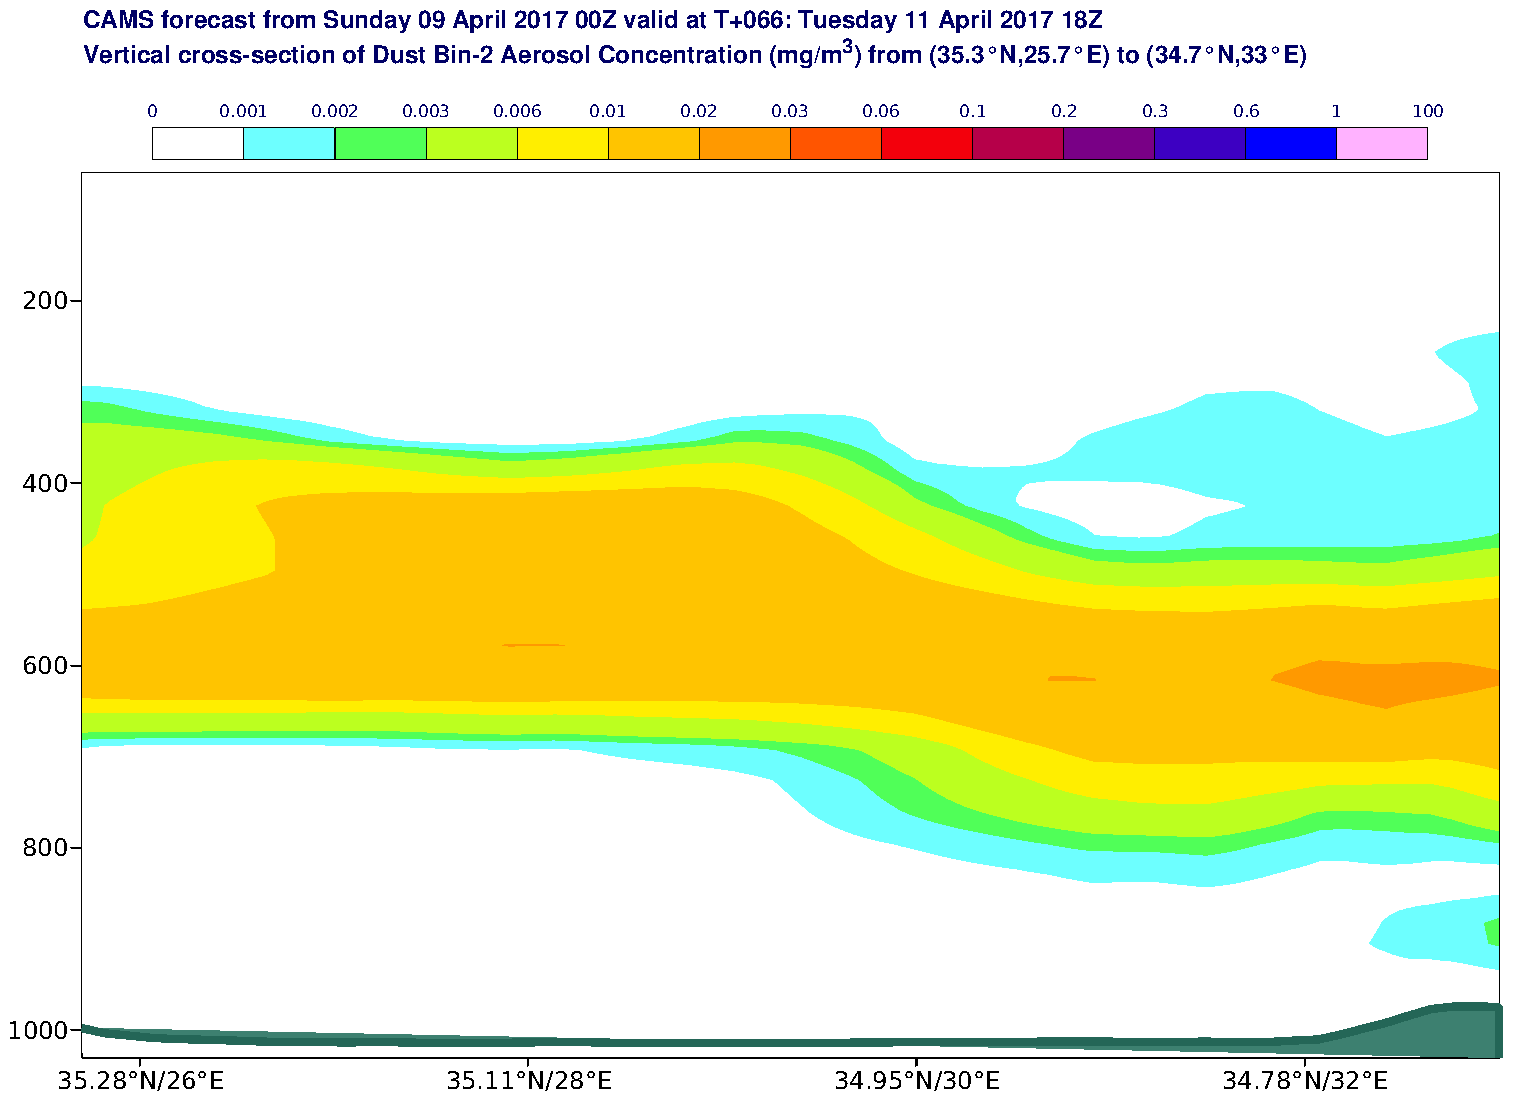 Vertical cross-section of Dust Bin-2 Aerosol Concentration (mg/m3) valid at T66 - 2017-04-11 18:00